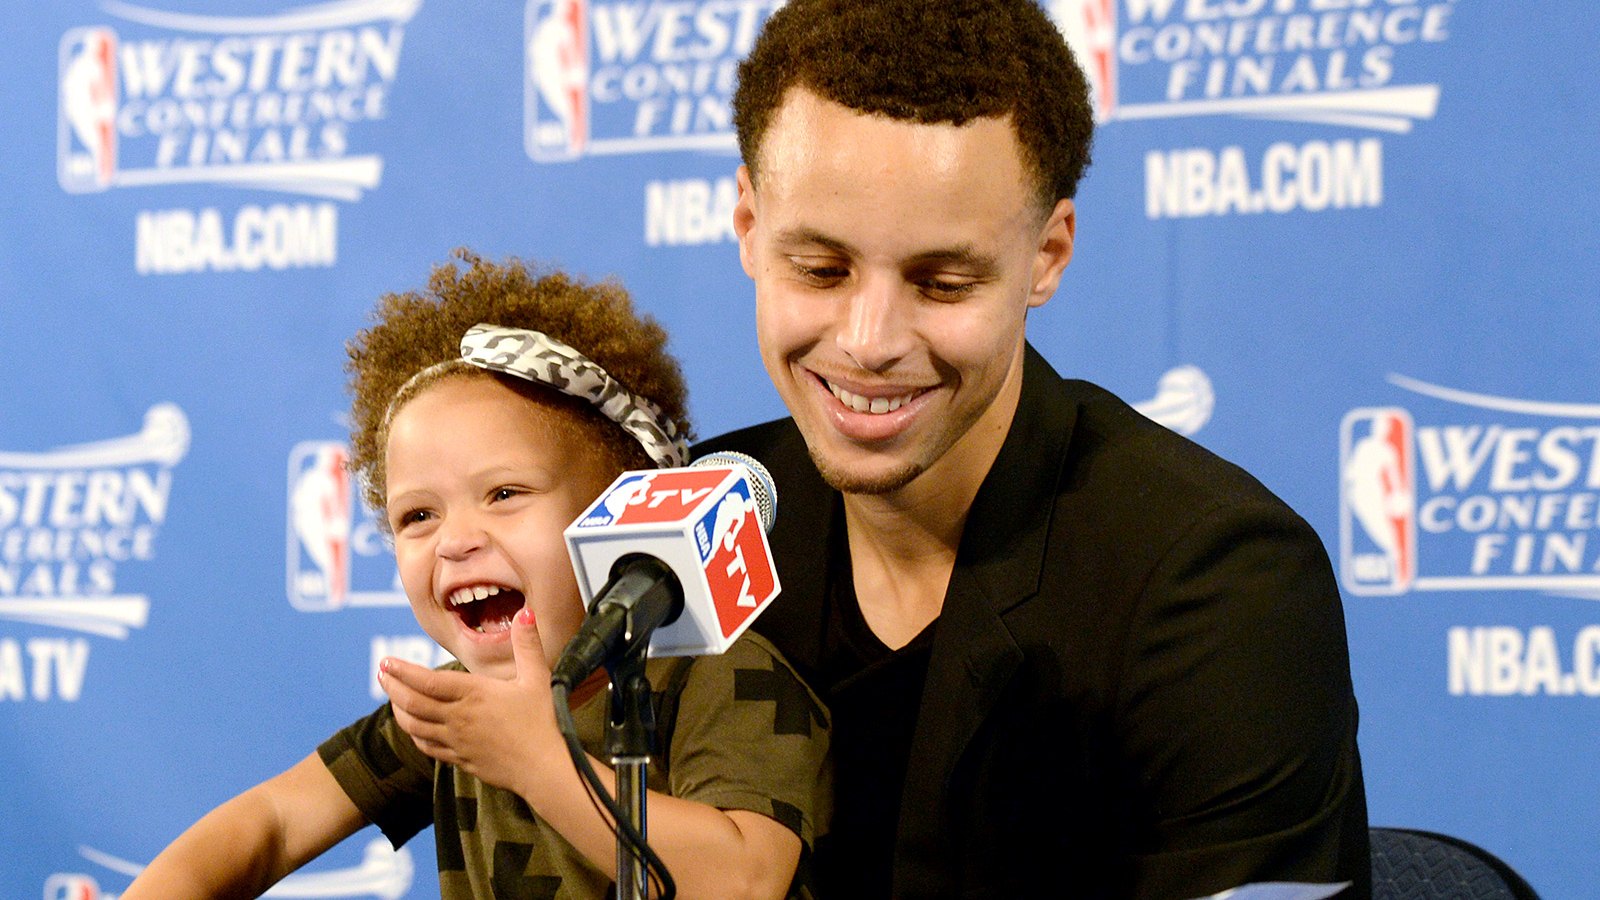 Stephen Curry with his daughter Riley during a press conference.